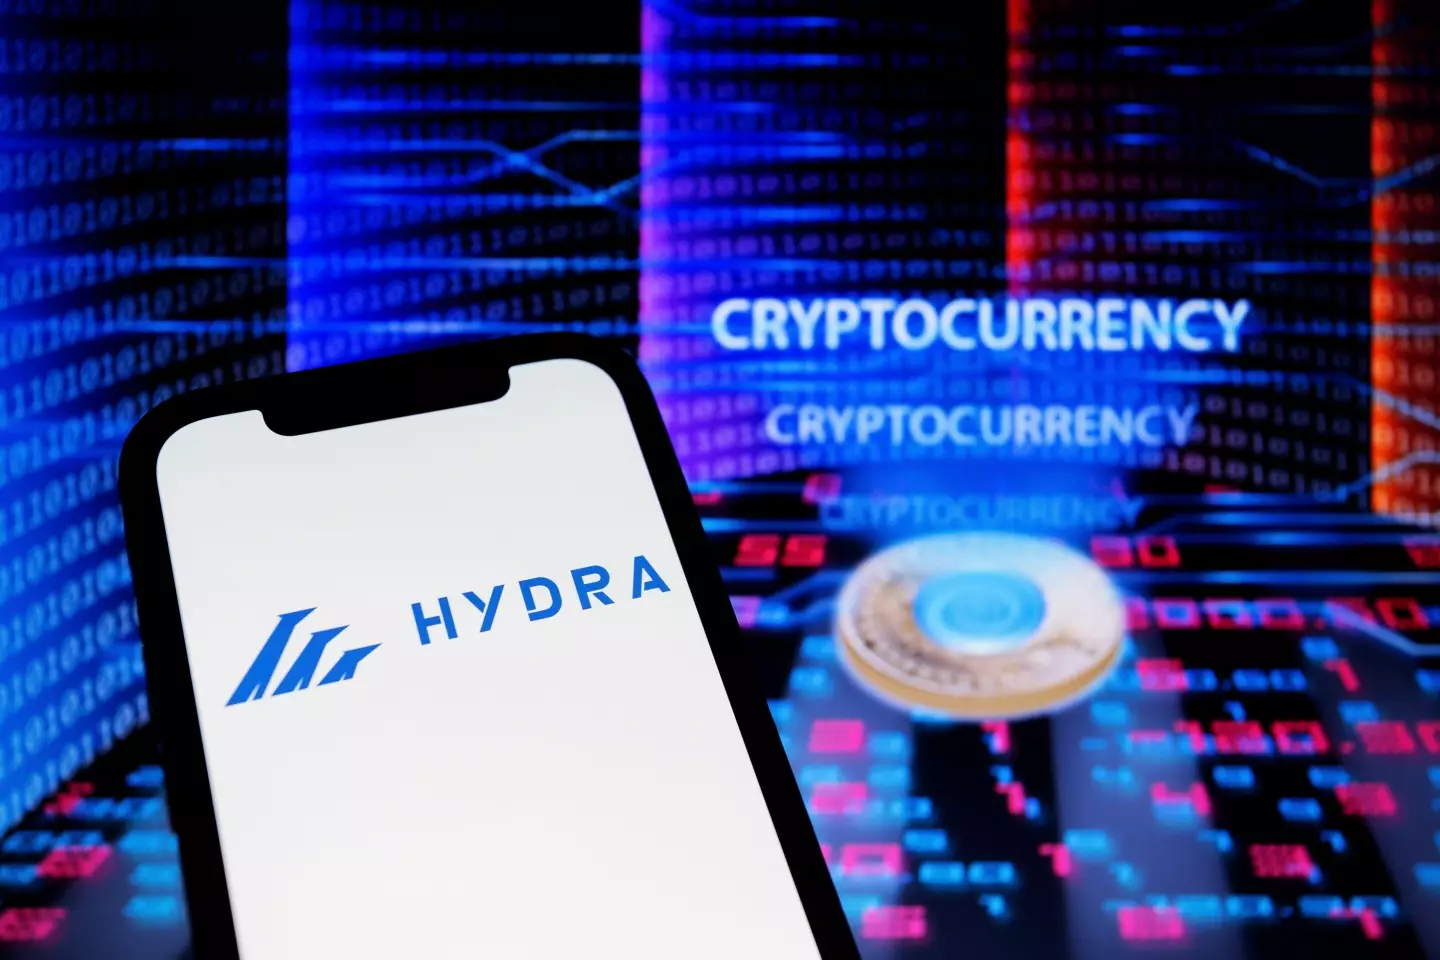 Hydra offered access to drugs, money laundering and hacking services.